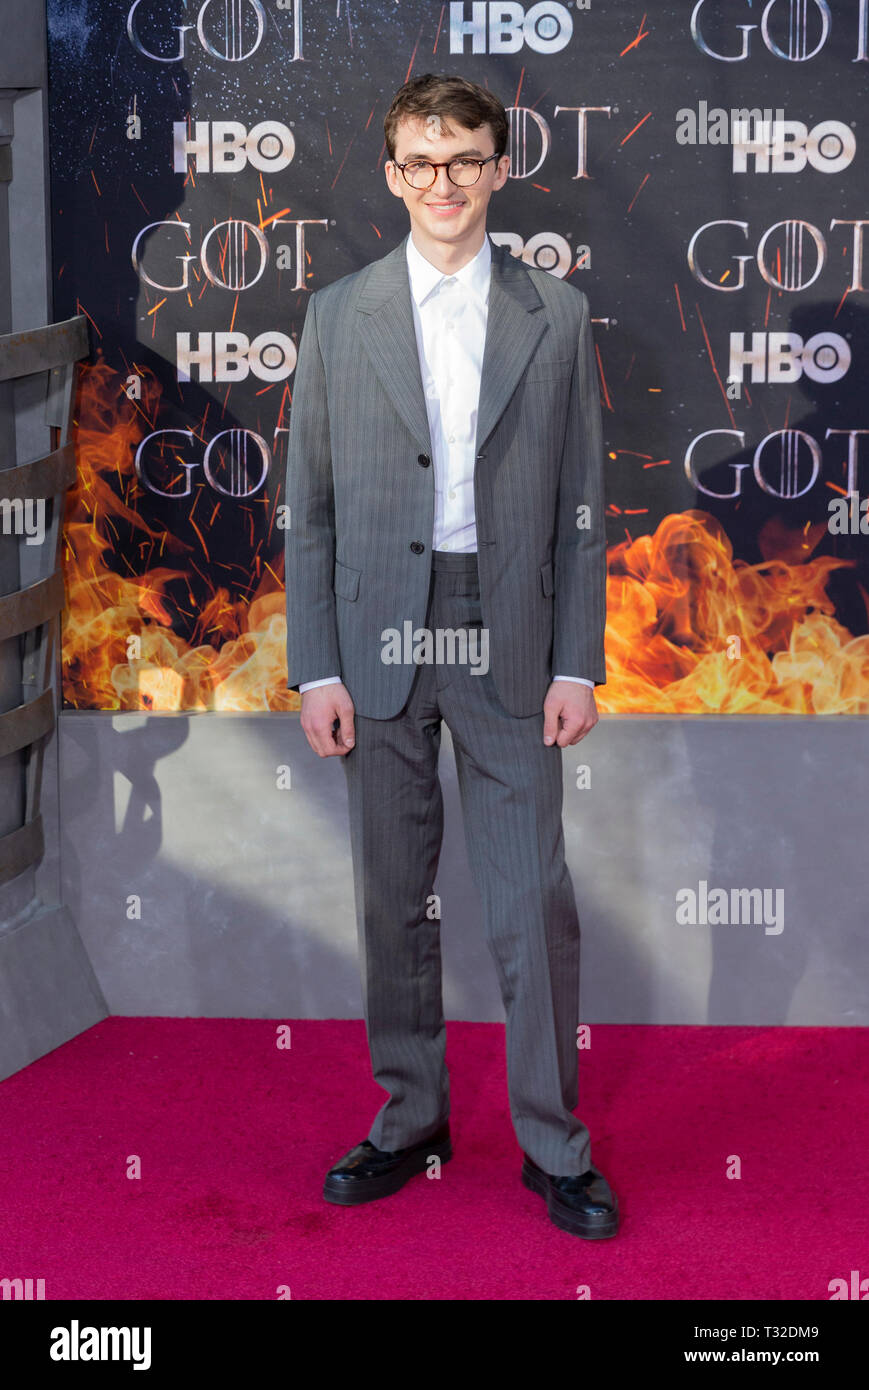 NEW YORK, NY APRIL 03: Isaac Hempstead Wright attends HBO 'Game of Thrones' final season premiere at Radio City Music Hall on April 03, 2019 in New Yo Stock Photo